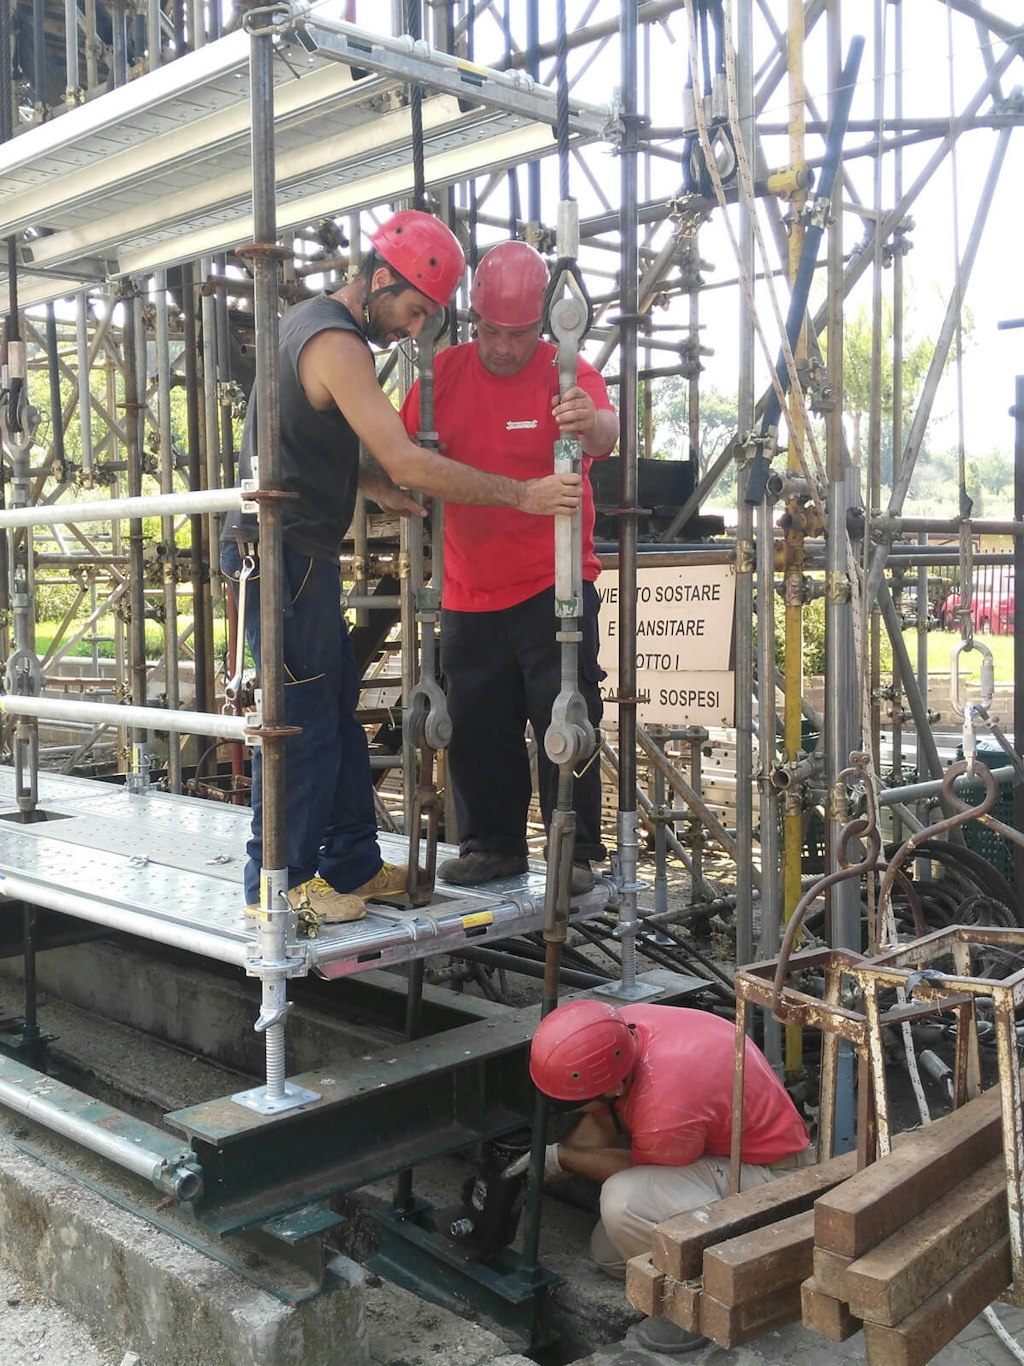 Mounting the hydraulic piston beneath the feet of the scaffold